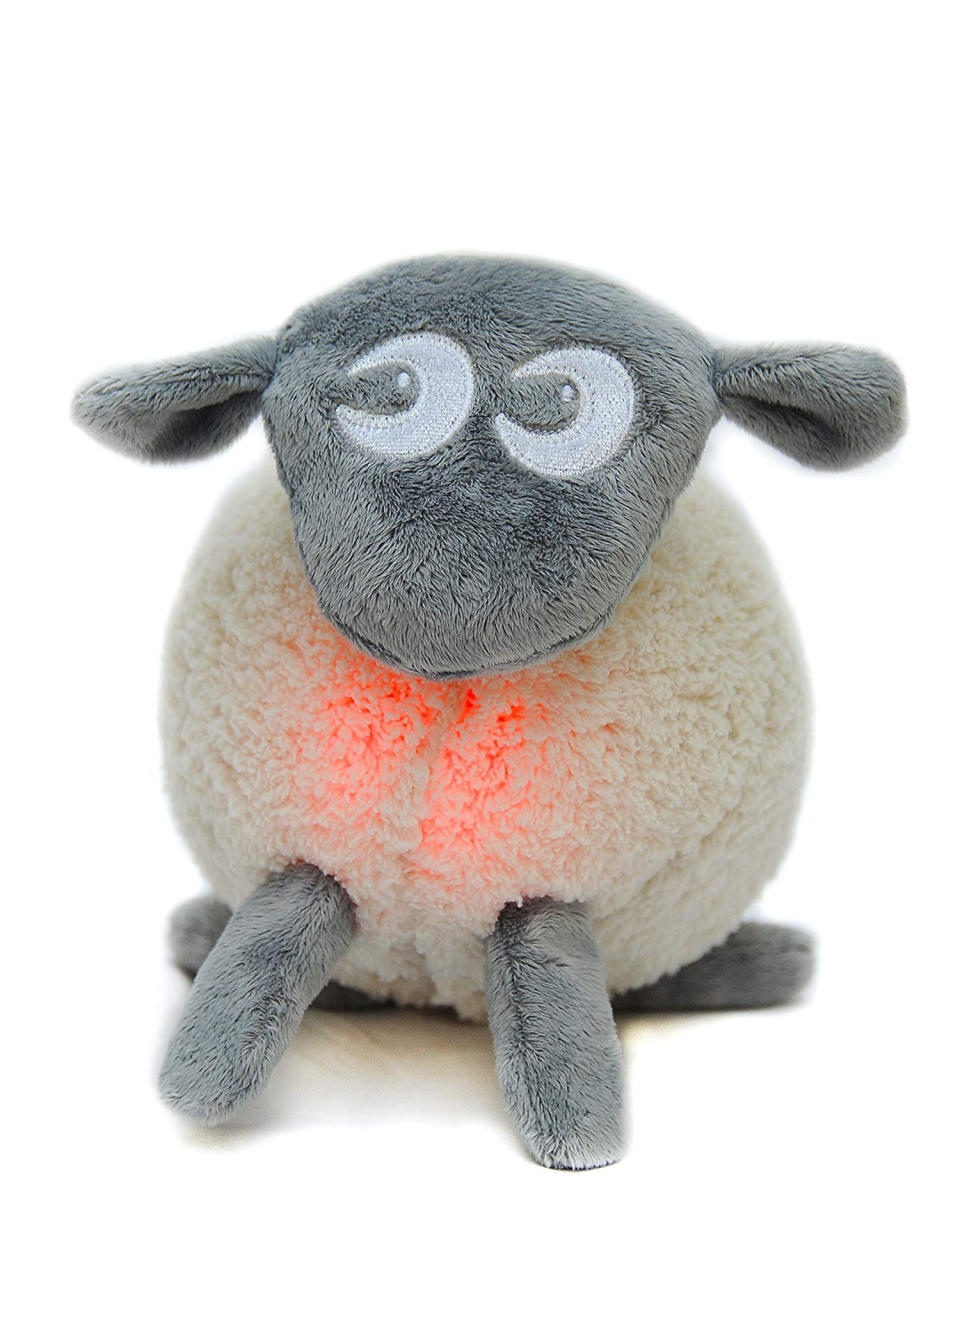 For babies: Sweet Dreamers sheep, £29.99